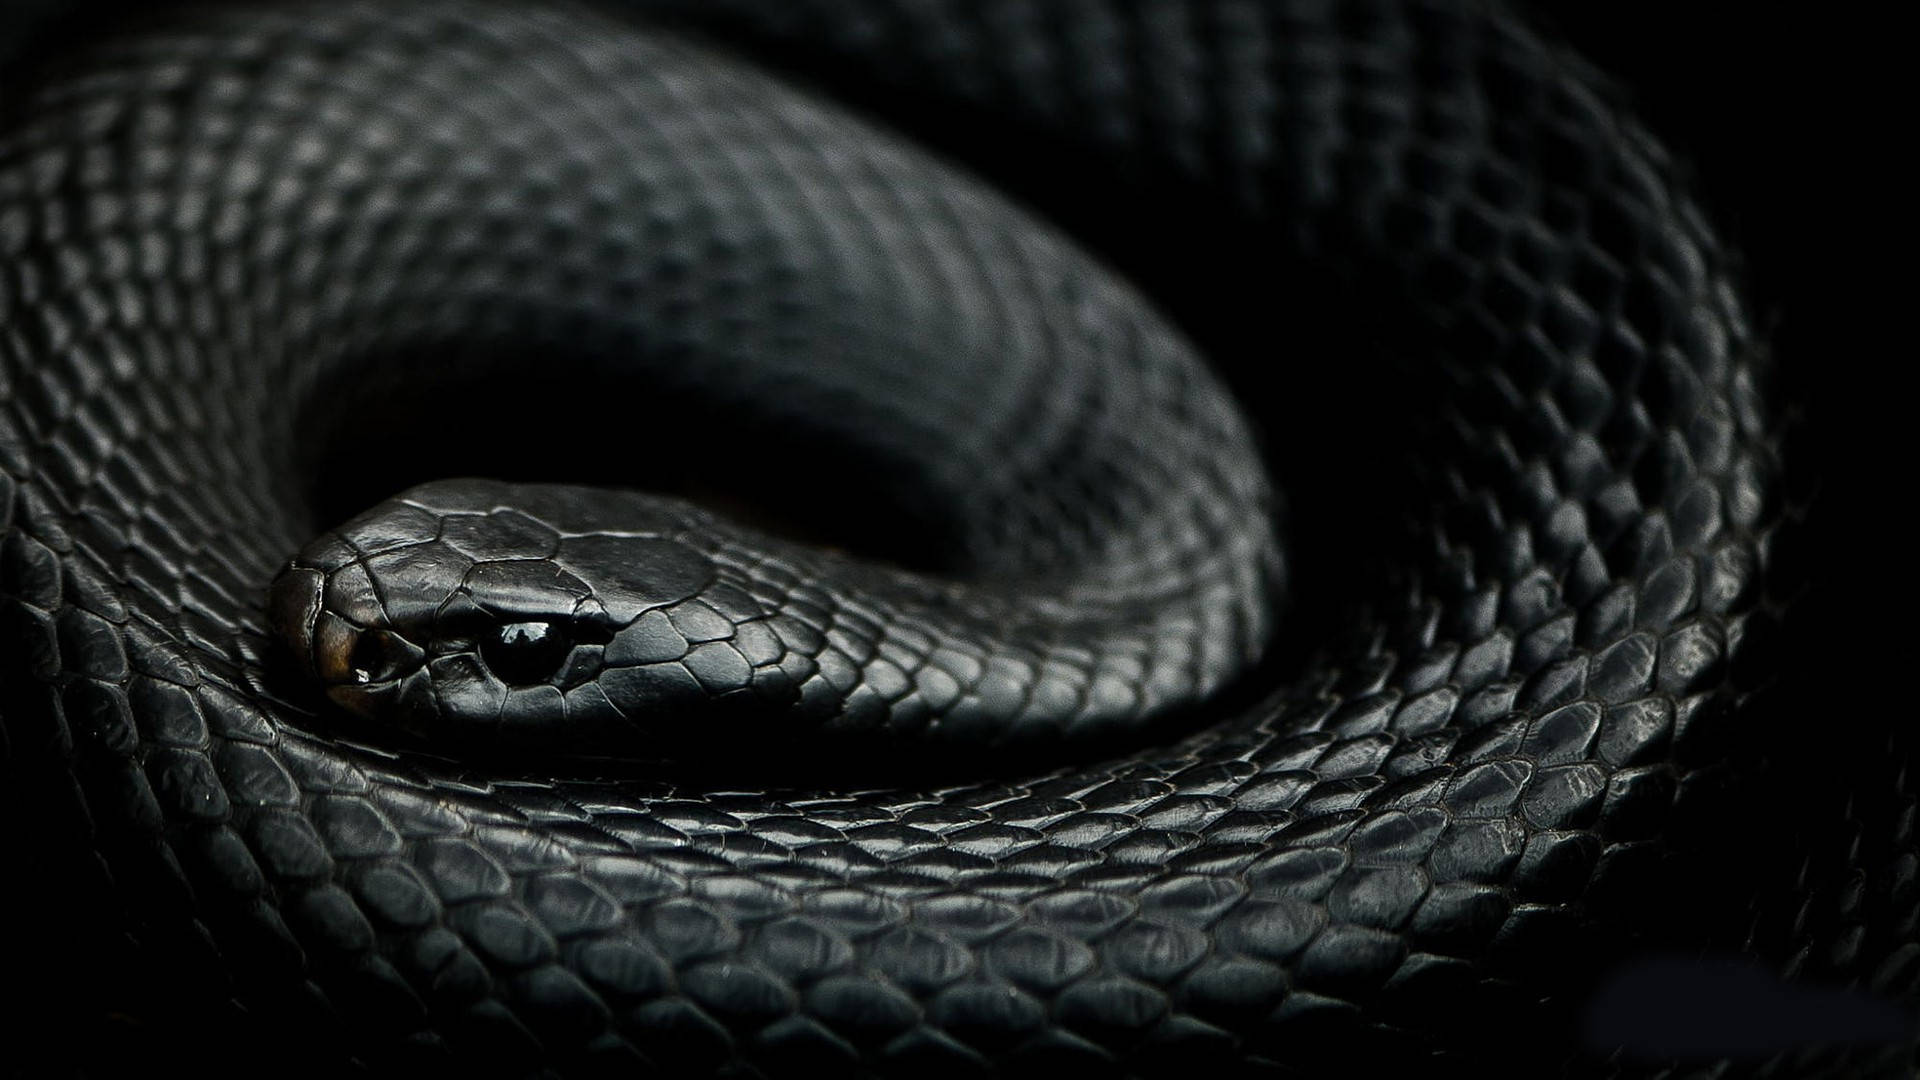 HD wallpaper facts about snakes black mamba animal themes animal  wildlife  Wallpaper Flare